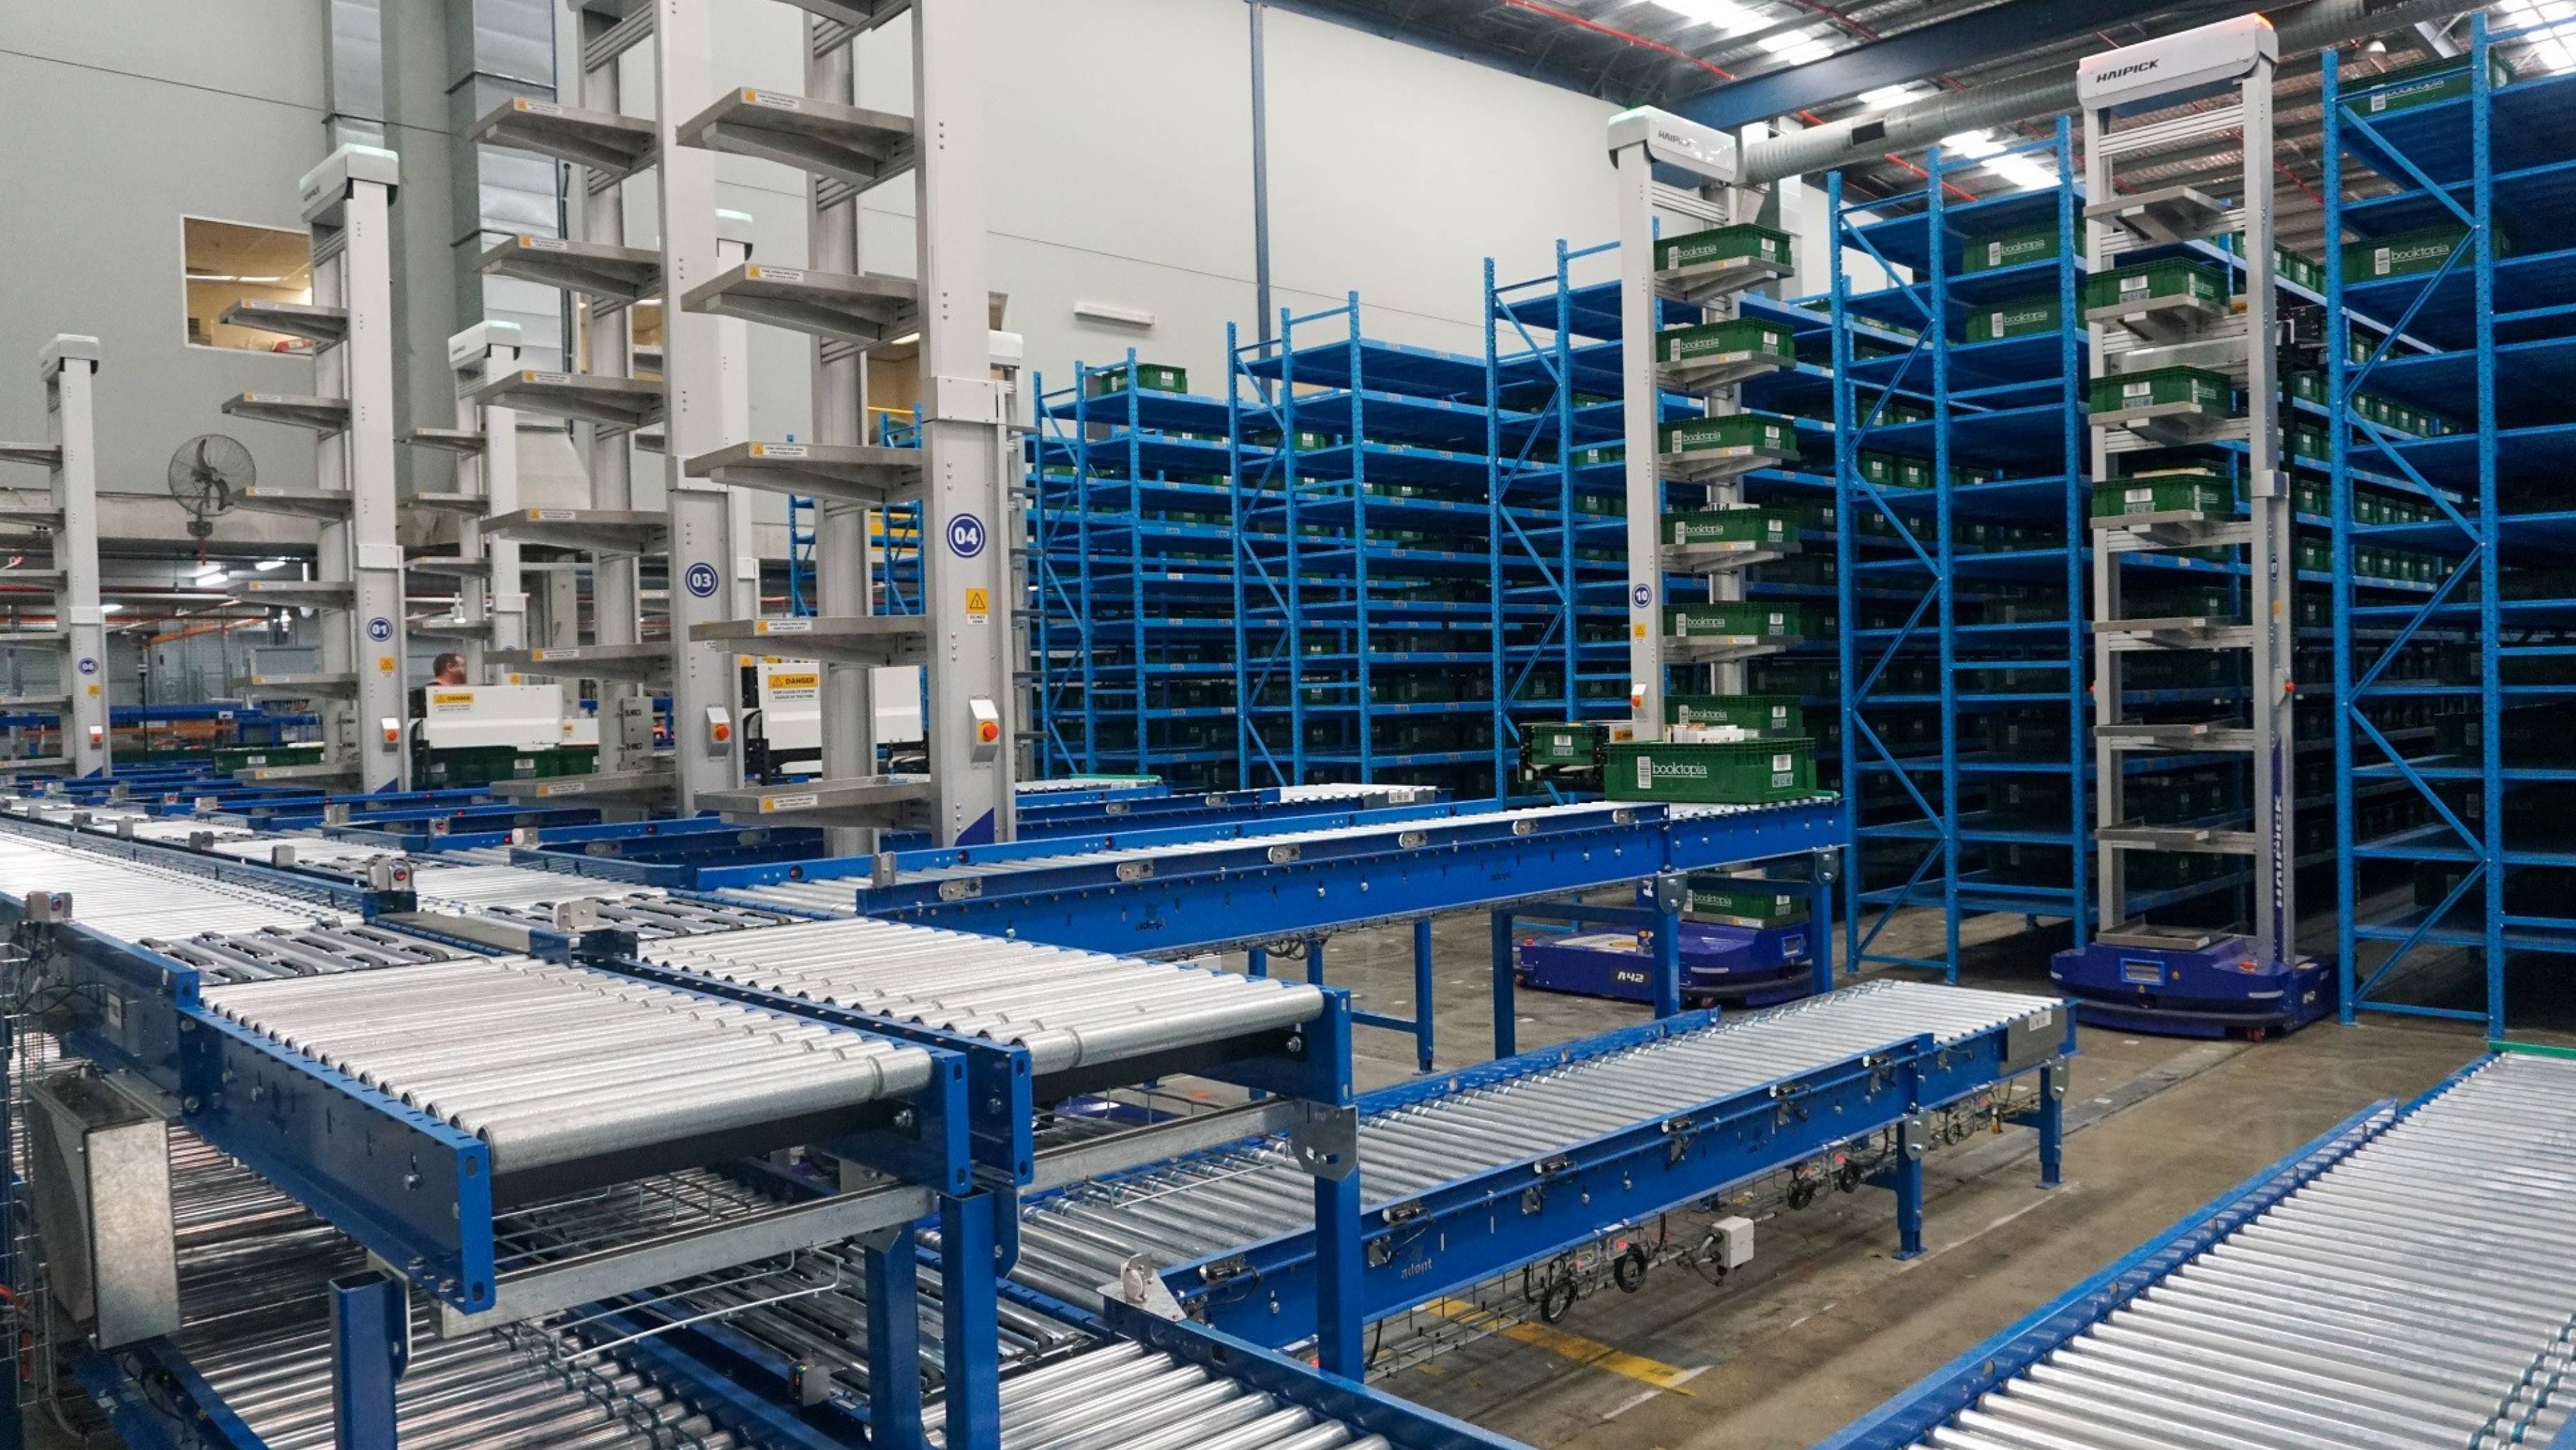 System Integration: Why is it crucial for warehouse automation?